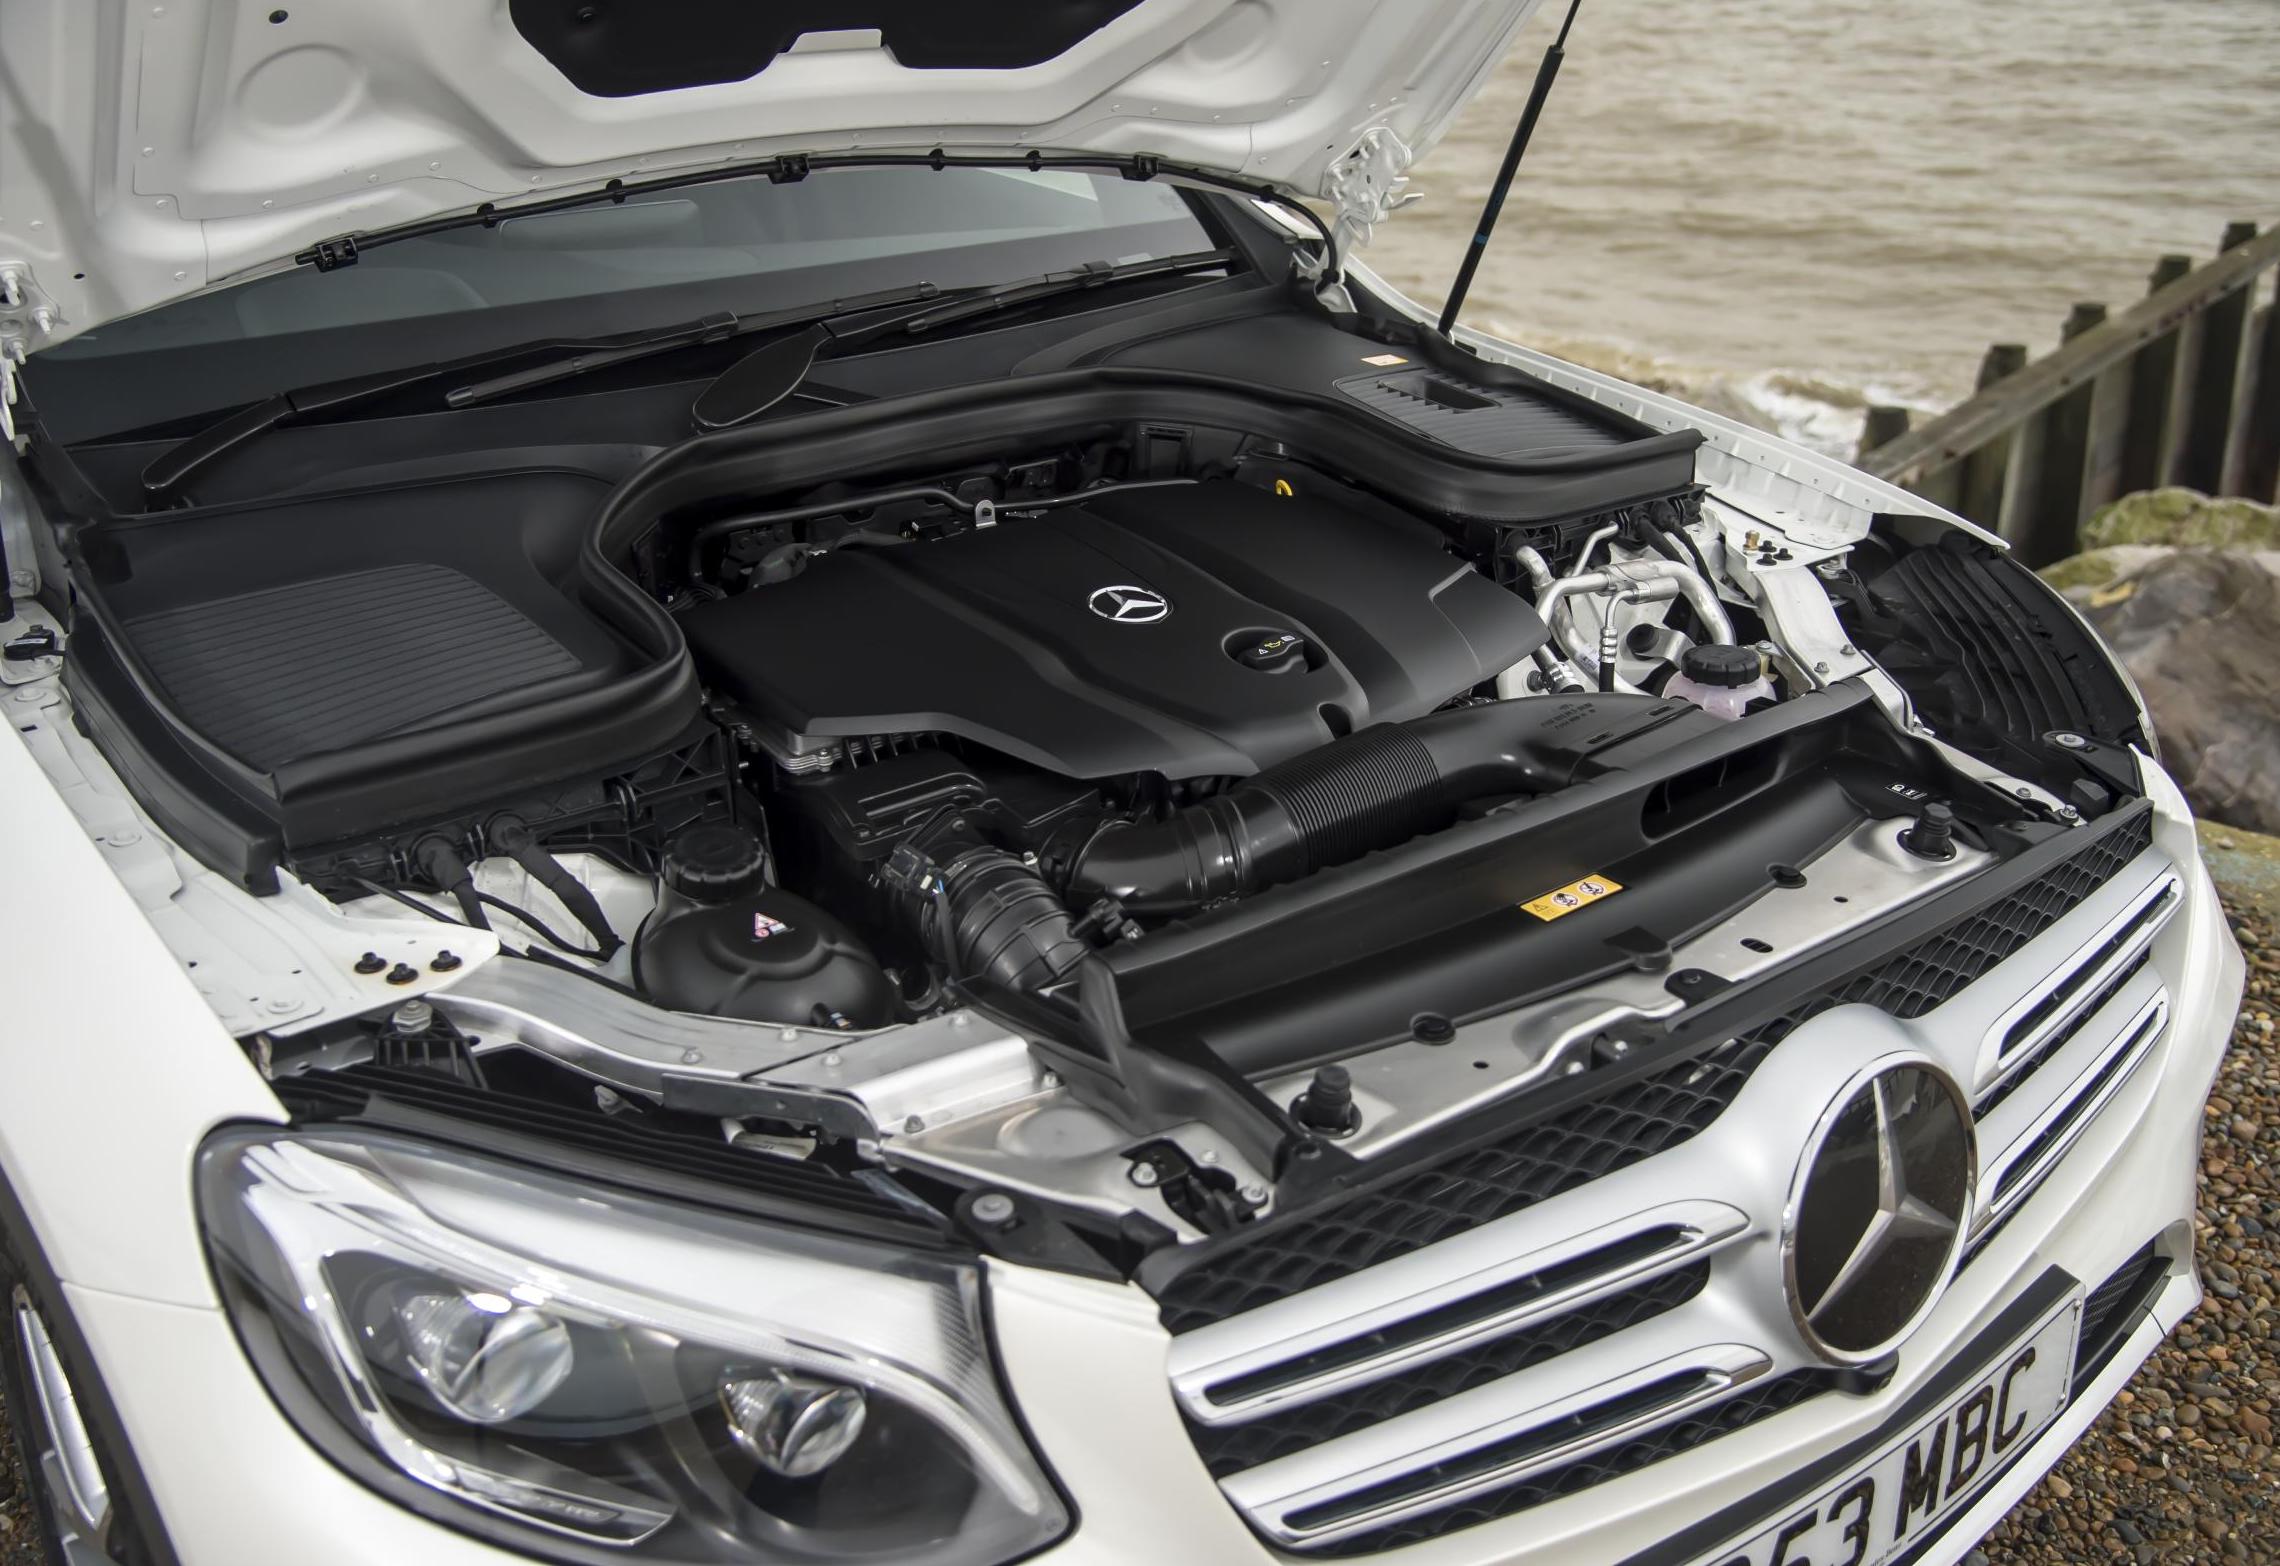 Mercedes ordered to recall cars for unapproved emissions software